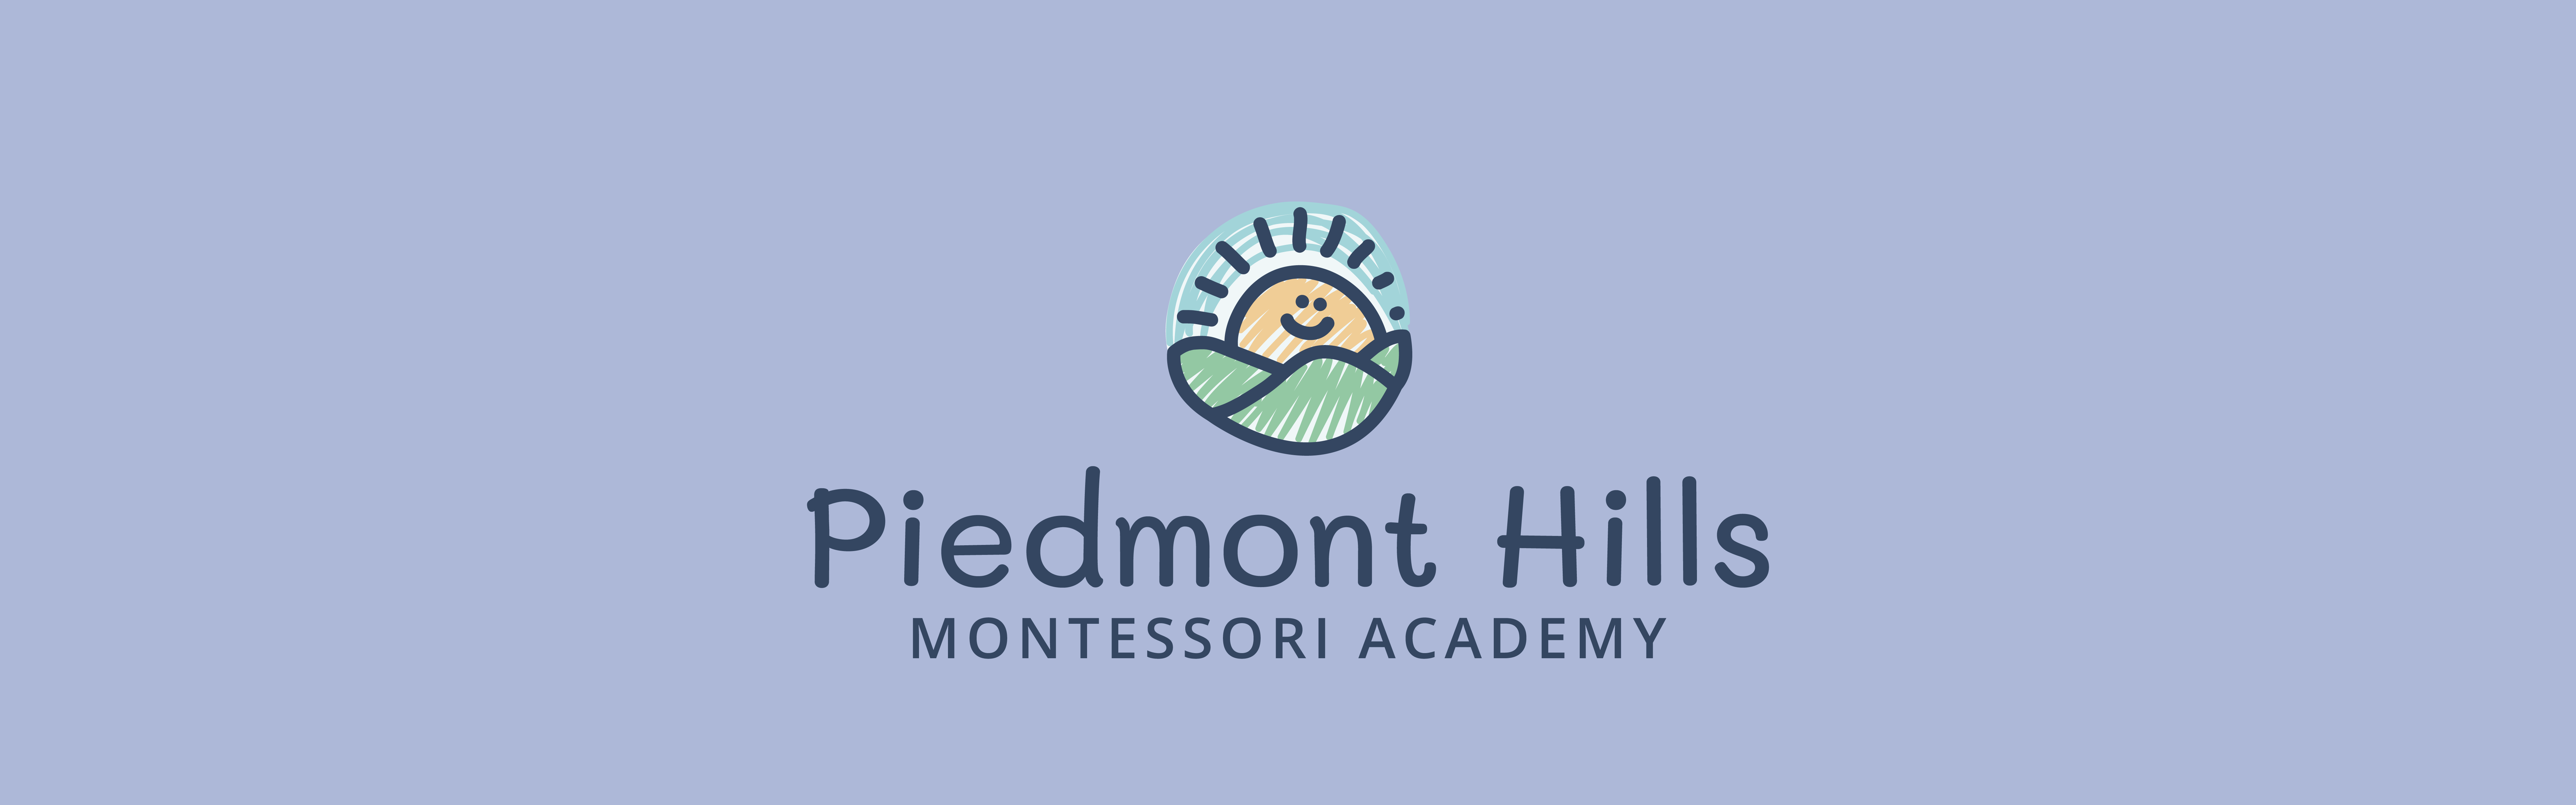 Logo of Piedmont Hills Montessori Academy featuring an illustration of a smiling child wrapped in a green blanket with a blue and green circular backdrop.